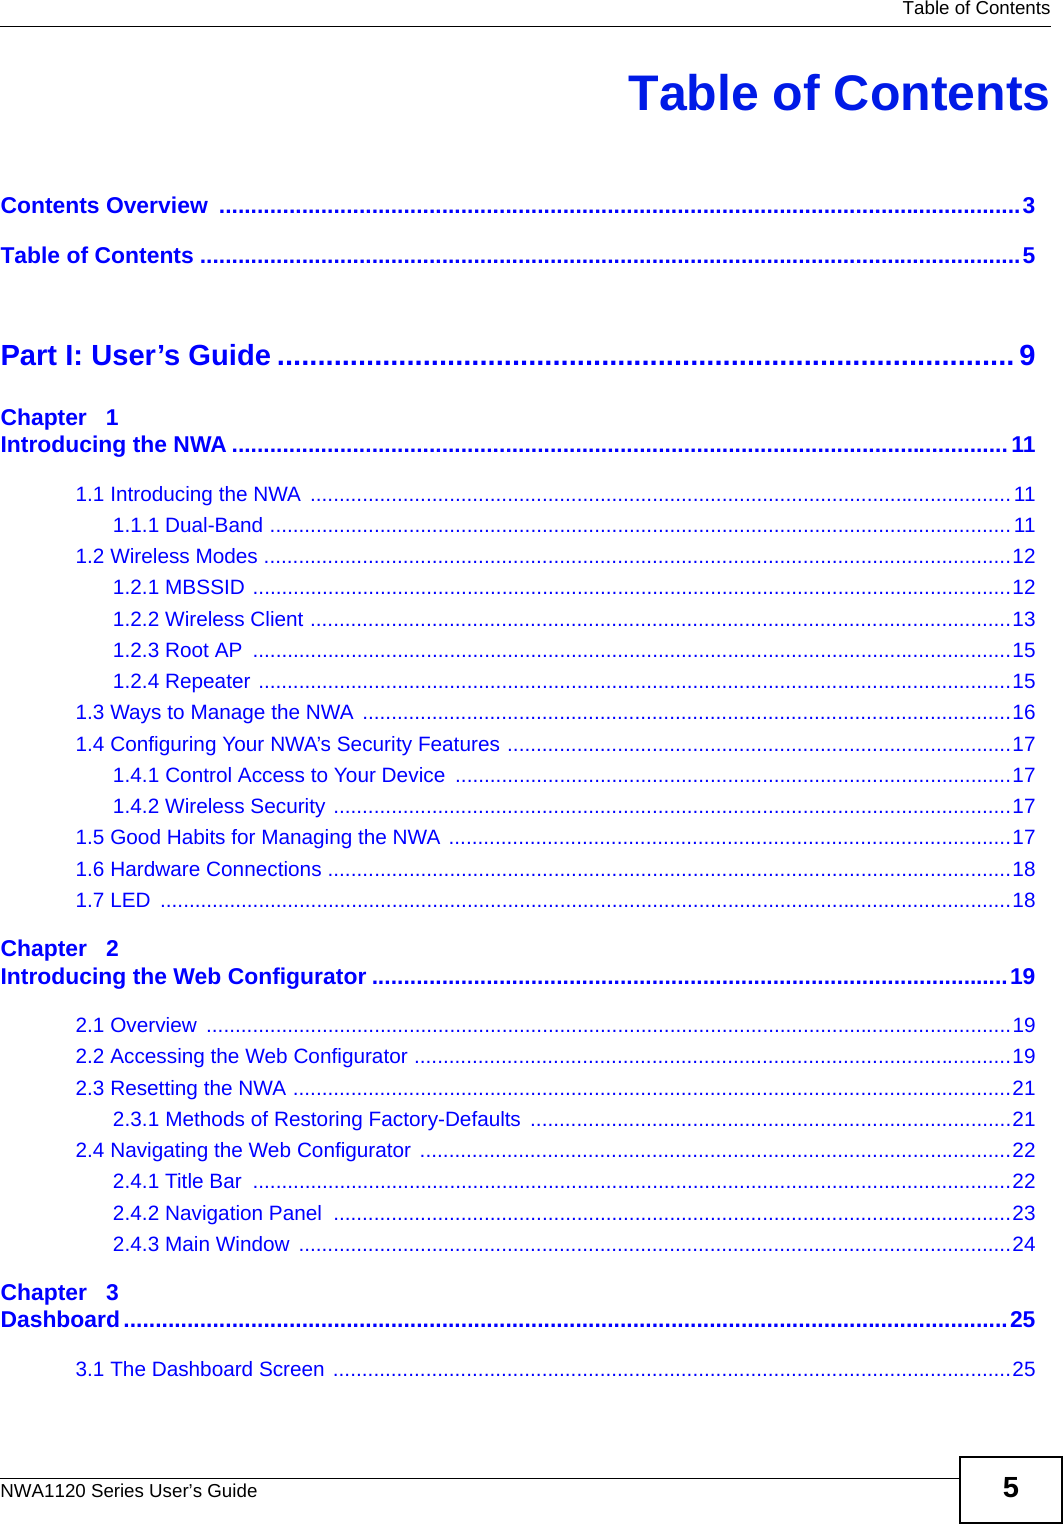   Table of ContentsNWA1120 Series User’s Guide 5Table of ContentsContents Overview  ..............................................................................................................................3Table of Contents .................................................................................................................................5Part I: User’s Guide ...........................................................................................9Chapter   1Introducing the NWA ..........................................................................................................................111.1 Introducing the NWA .........................................................................................................................111.1.1 Dual-Band ................................................................................................................................111.2 Wireless Modes .................................................................................................................................121.2.1 MBSSID ...................................................................................................................................121.2.2 Wireless Client .........................................................................................................................131.2.3 Root AP  ...................................................................................................................................151.2.4 Repeater ..................................................................................................................................151.3 Ways to Manage the NWA ................................................................................................................161.4 Configuring Your NWA’s Security Features .......................................................................................171.4.1 Control Access to Your Device ................................................................................................171.4.2 Wireless Security .....................................................................................................................171.5 Good Habits for Managing the NWA .................................................................................................171.6 Hardware Connections ......................................................................................................................181.7 LED  ...................................................................................................................................................18Chapter   2Introducing the Web Configurator ....................................................................................................192.1 Overview  ...........................................................................................................................................192.2 Accessing the Web Configurator .......................................................................................................192.3 Resetting the NWA ............................................................................................................................212.3.1 Methods of Restoring Factory-Defaults ...................................................................................212.4 Navigating the Web Configurator ......................................................................................................222.4.1 Title Bar  ...................................................................................................................................222.4.2 Navigation Panel  .....................................................................................................................232.4.3 Main Window  ...........................................................................................................................24Chapter   3Dashboard...........................................................................................................................................253.1 The Dashboard Screen .....................................................................................................................25